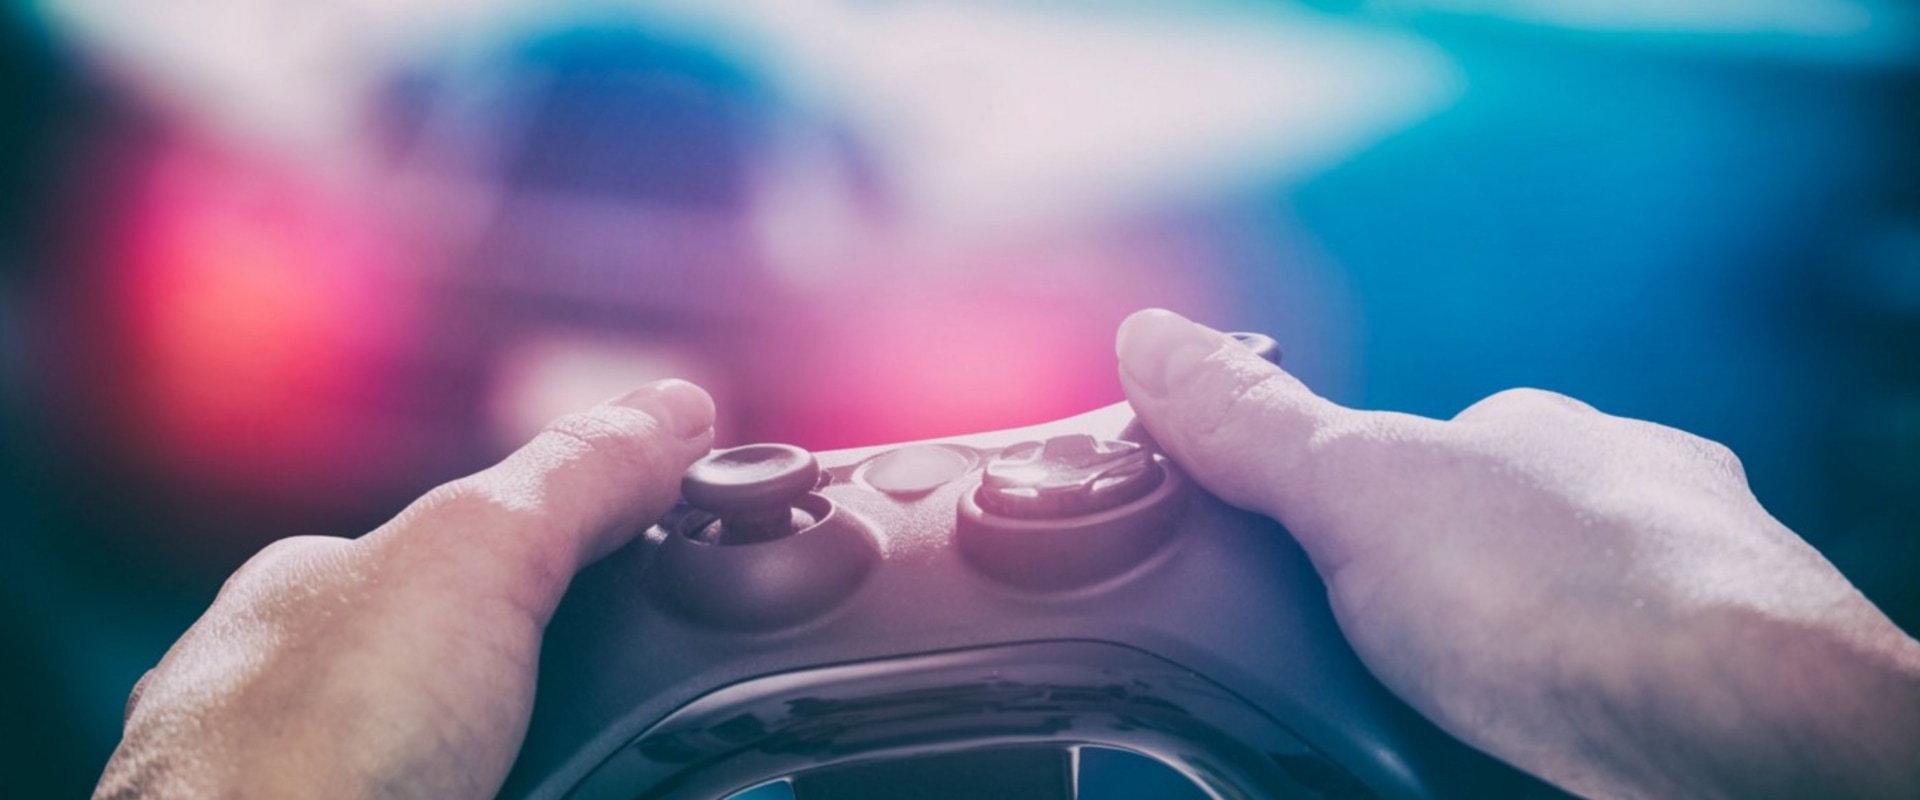 The Impact of Online Games on Student Academic Performance